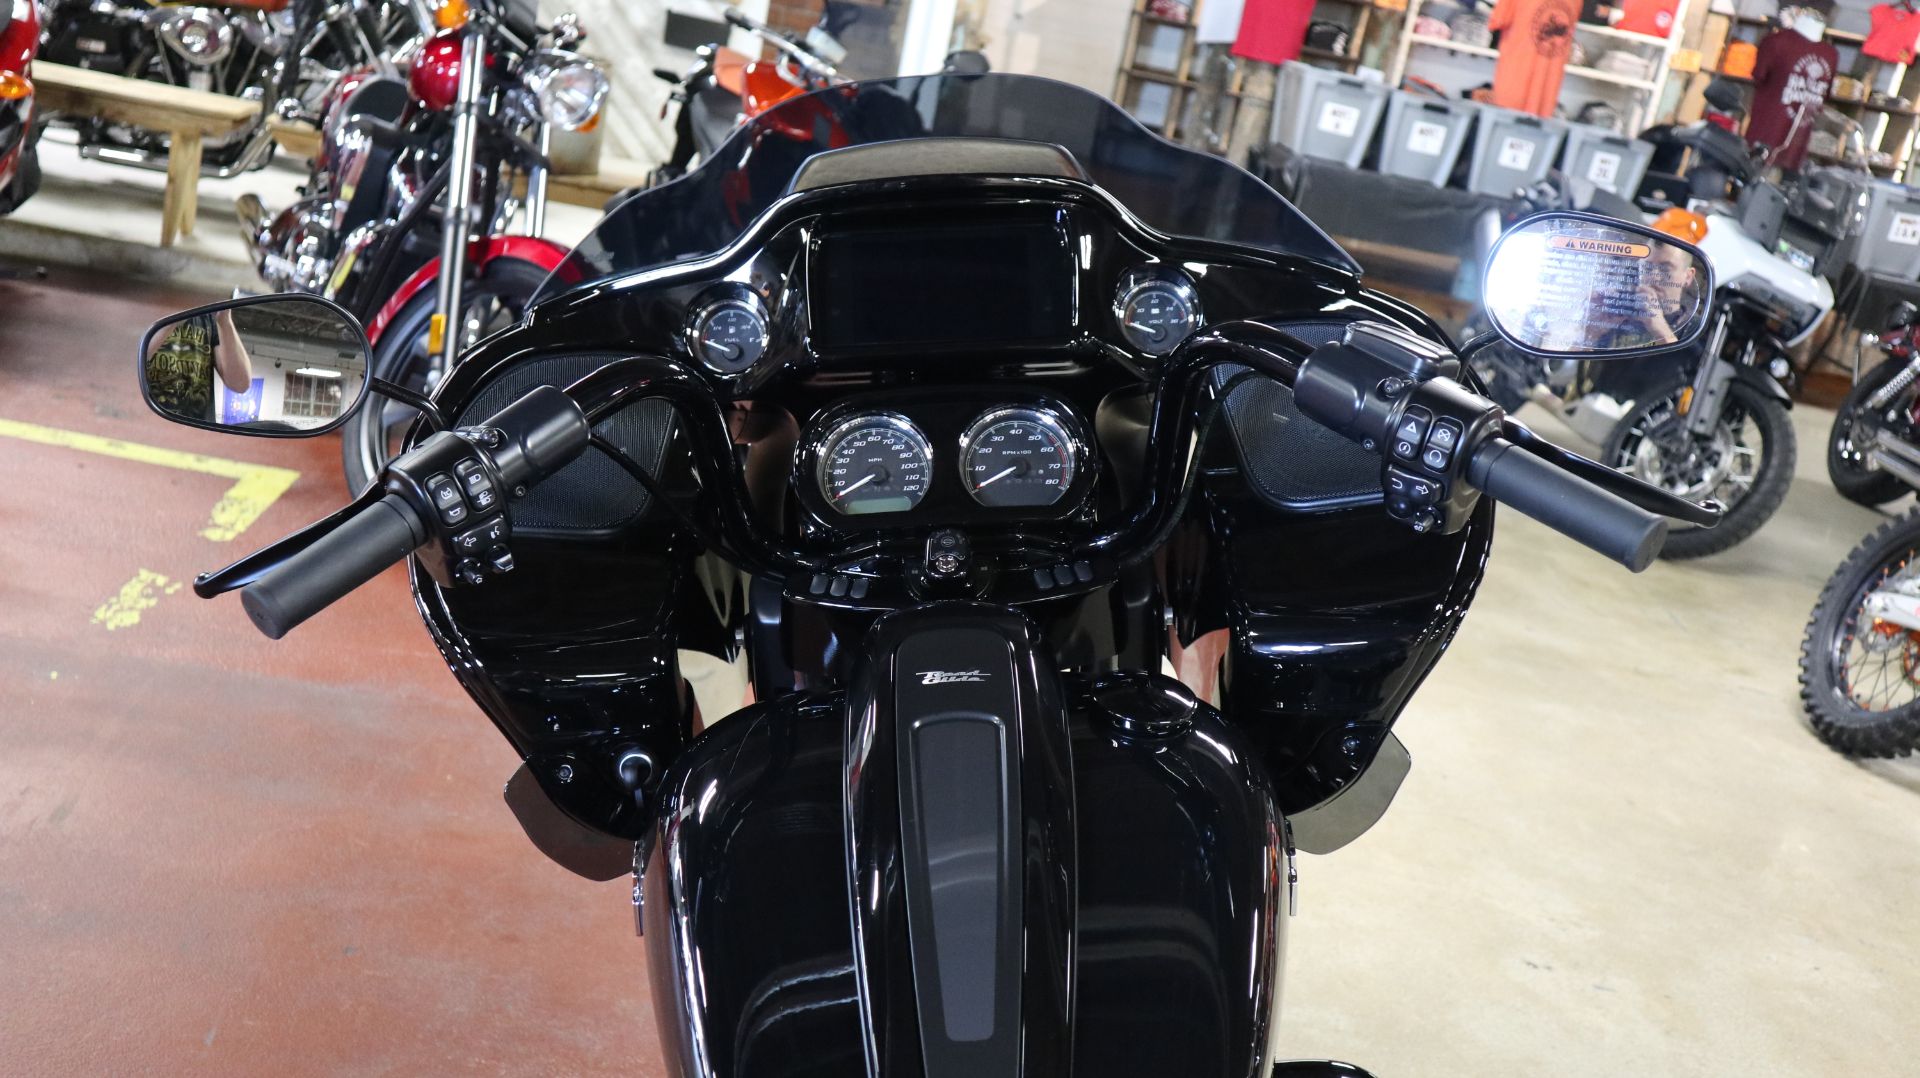 2022 Harley-Davidson Road Glide® Special in New London, Connecticut - Photo 11